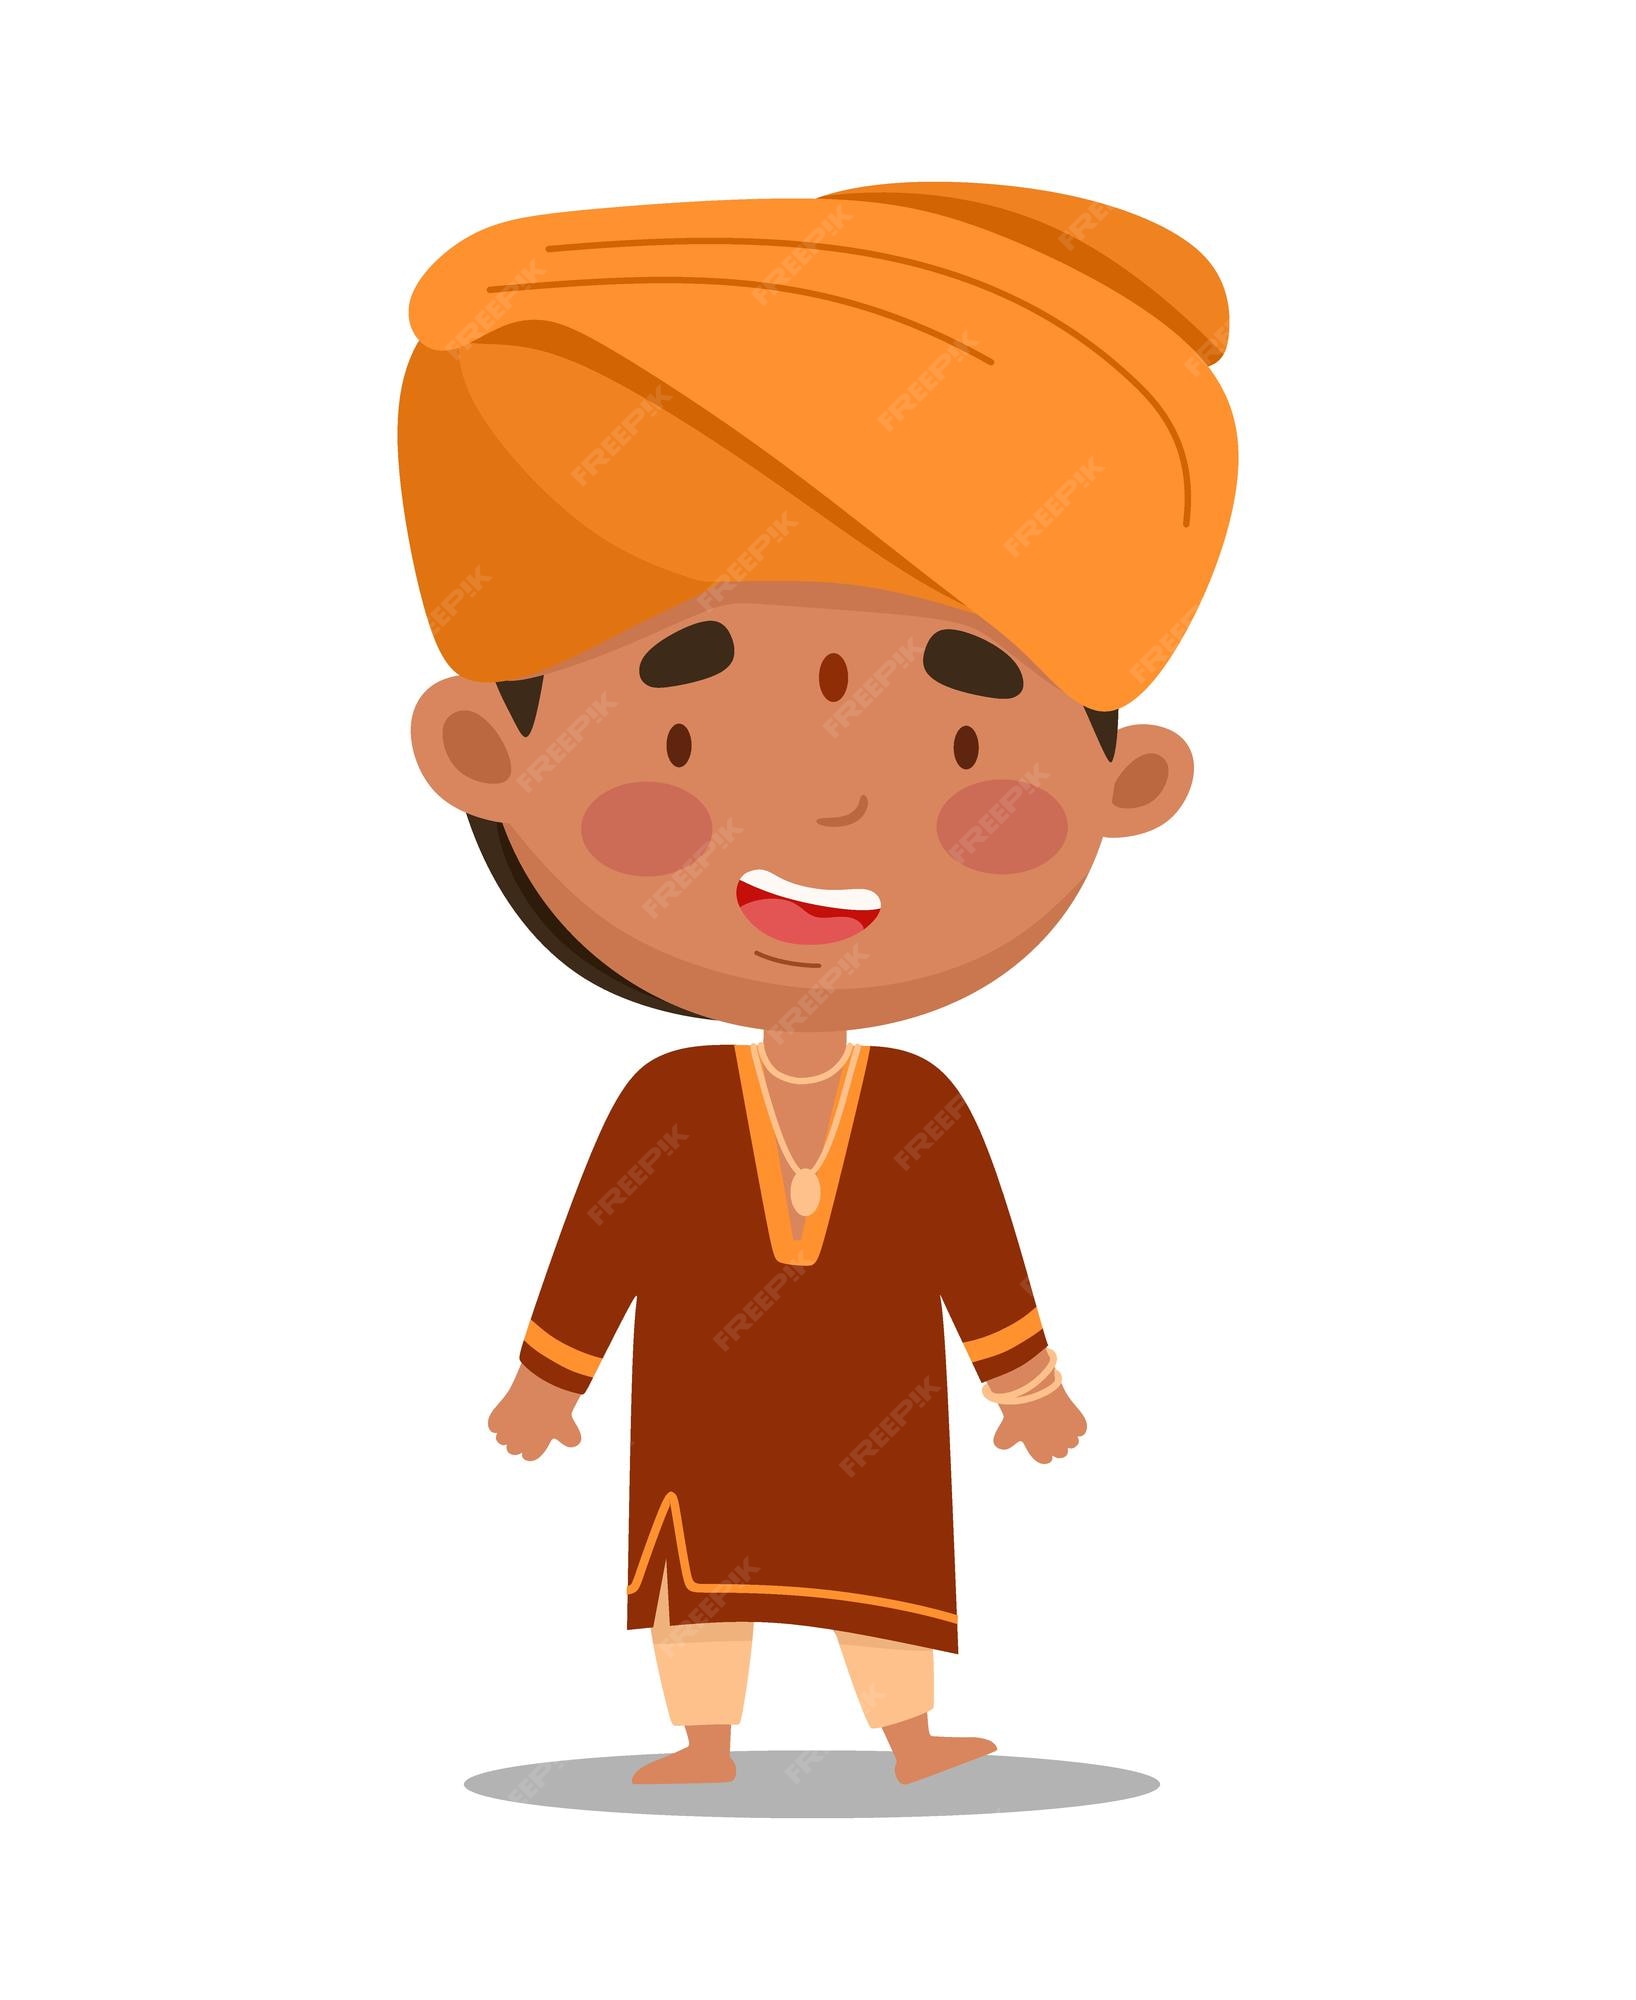 Premium Vector | Indian man is cute and funny. vector illustration in a  flat cartoon